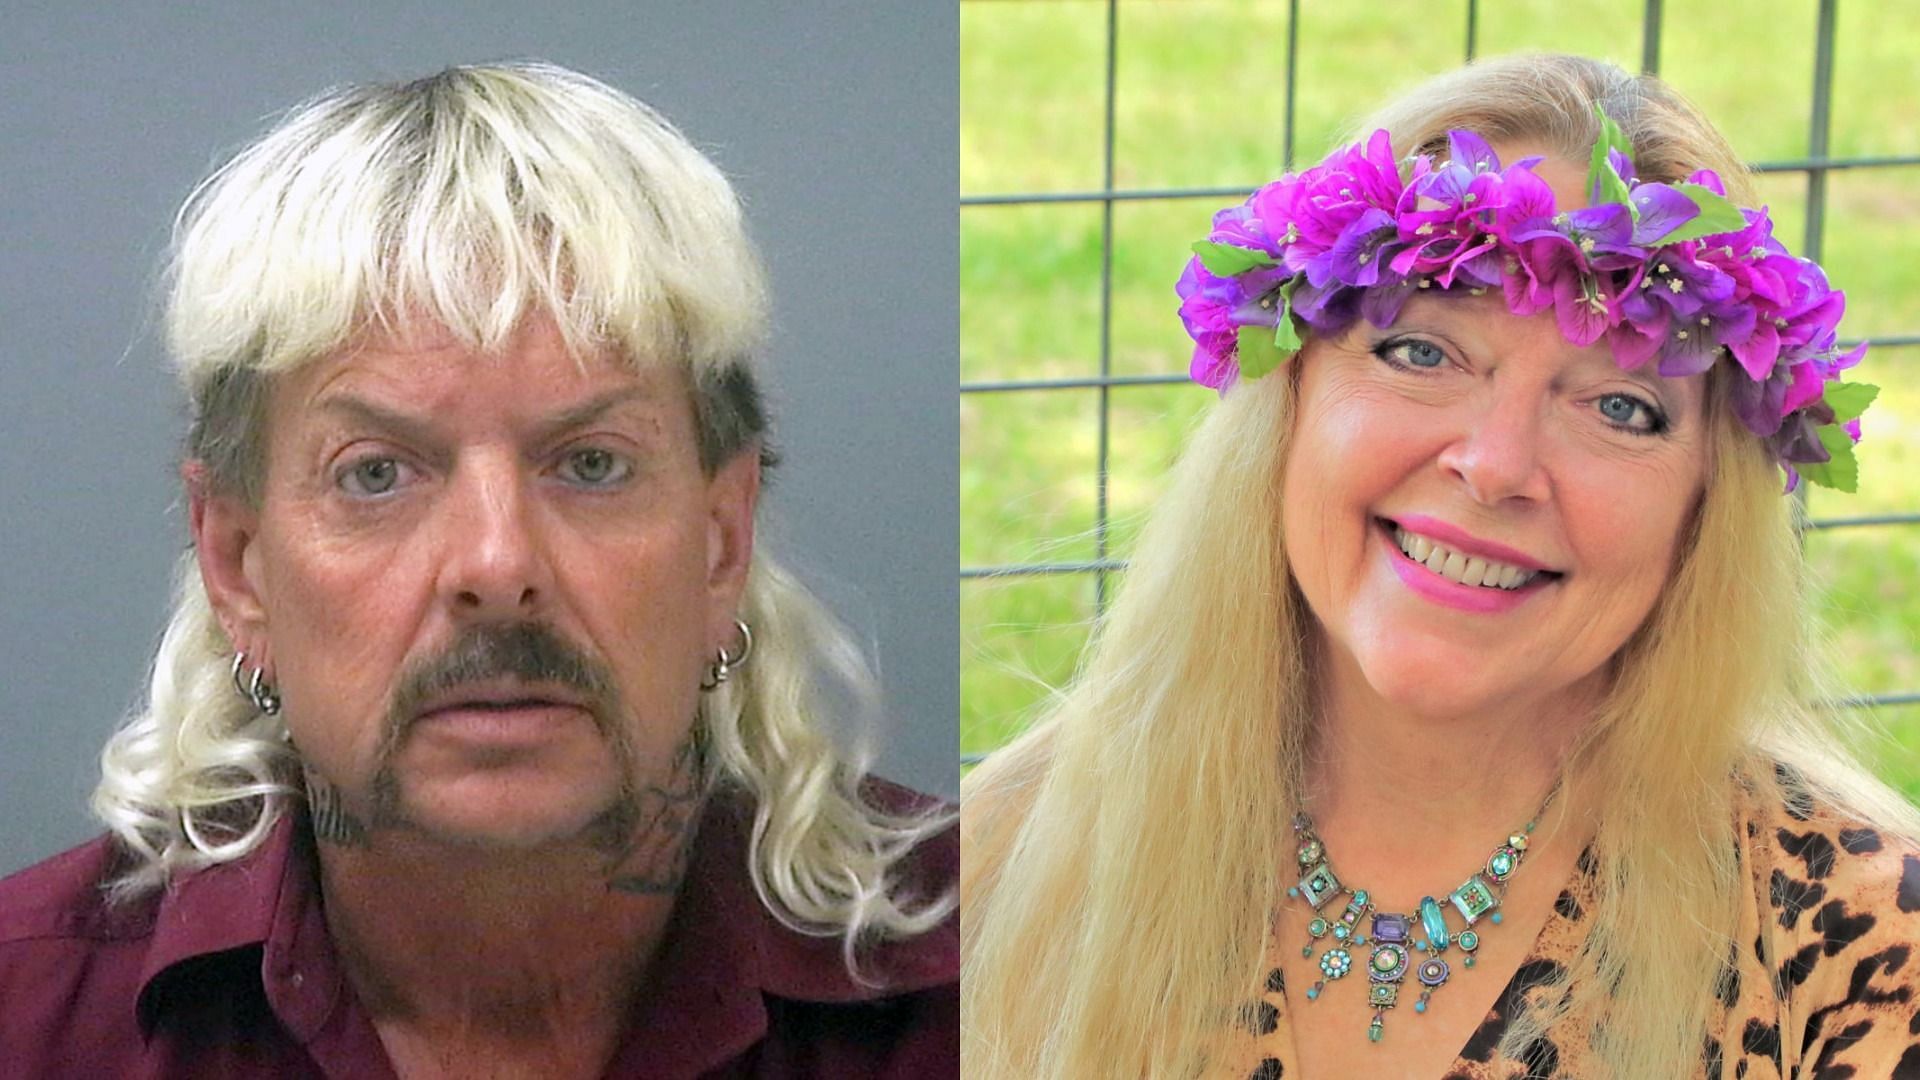 Joe Exotic and Carole Baskin&#039;s rivalry began back in 2009 (Image via Getty Images)